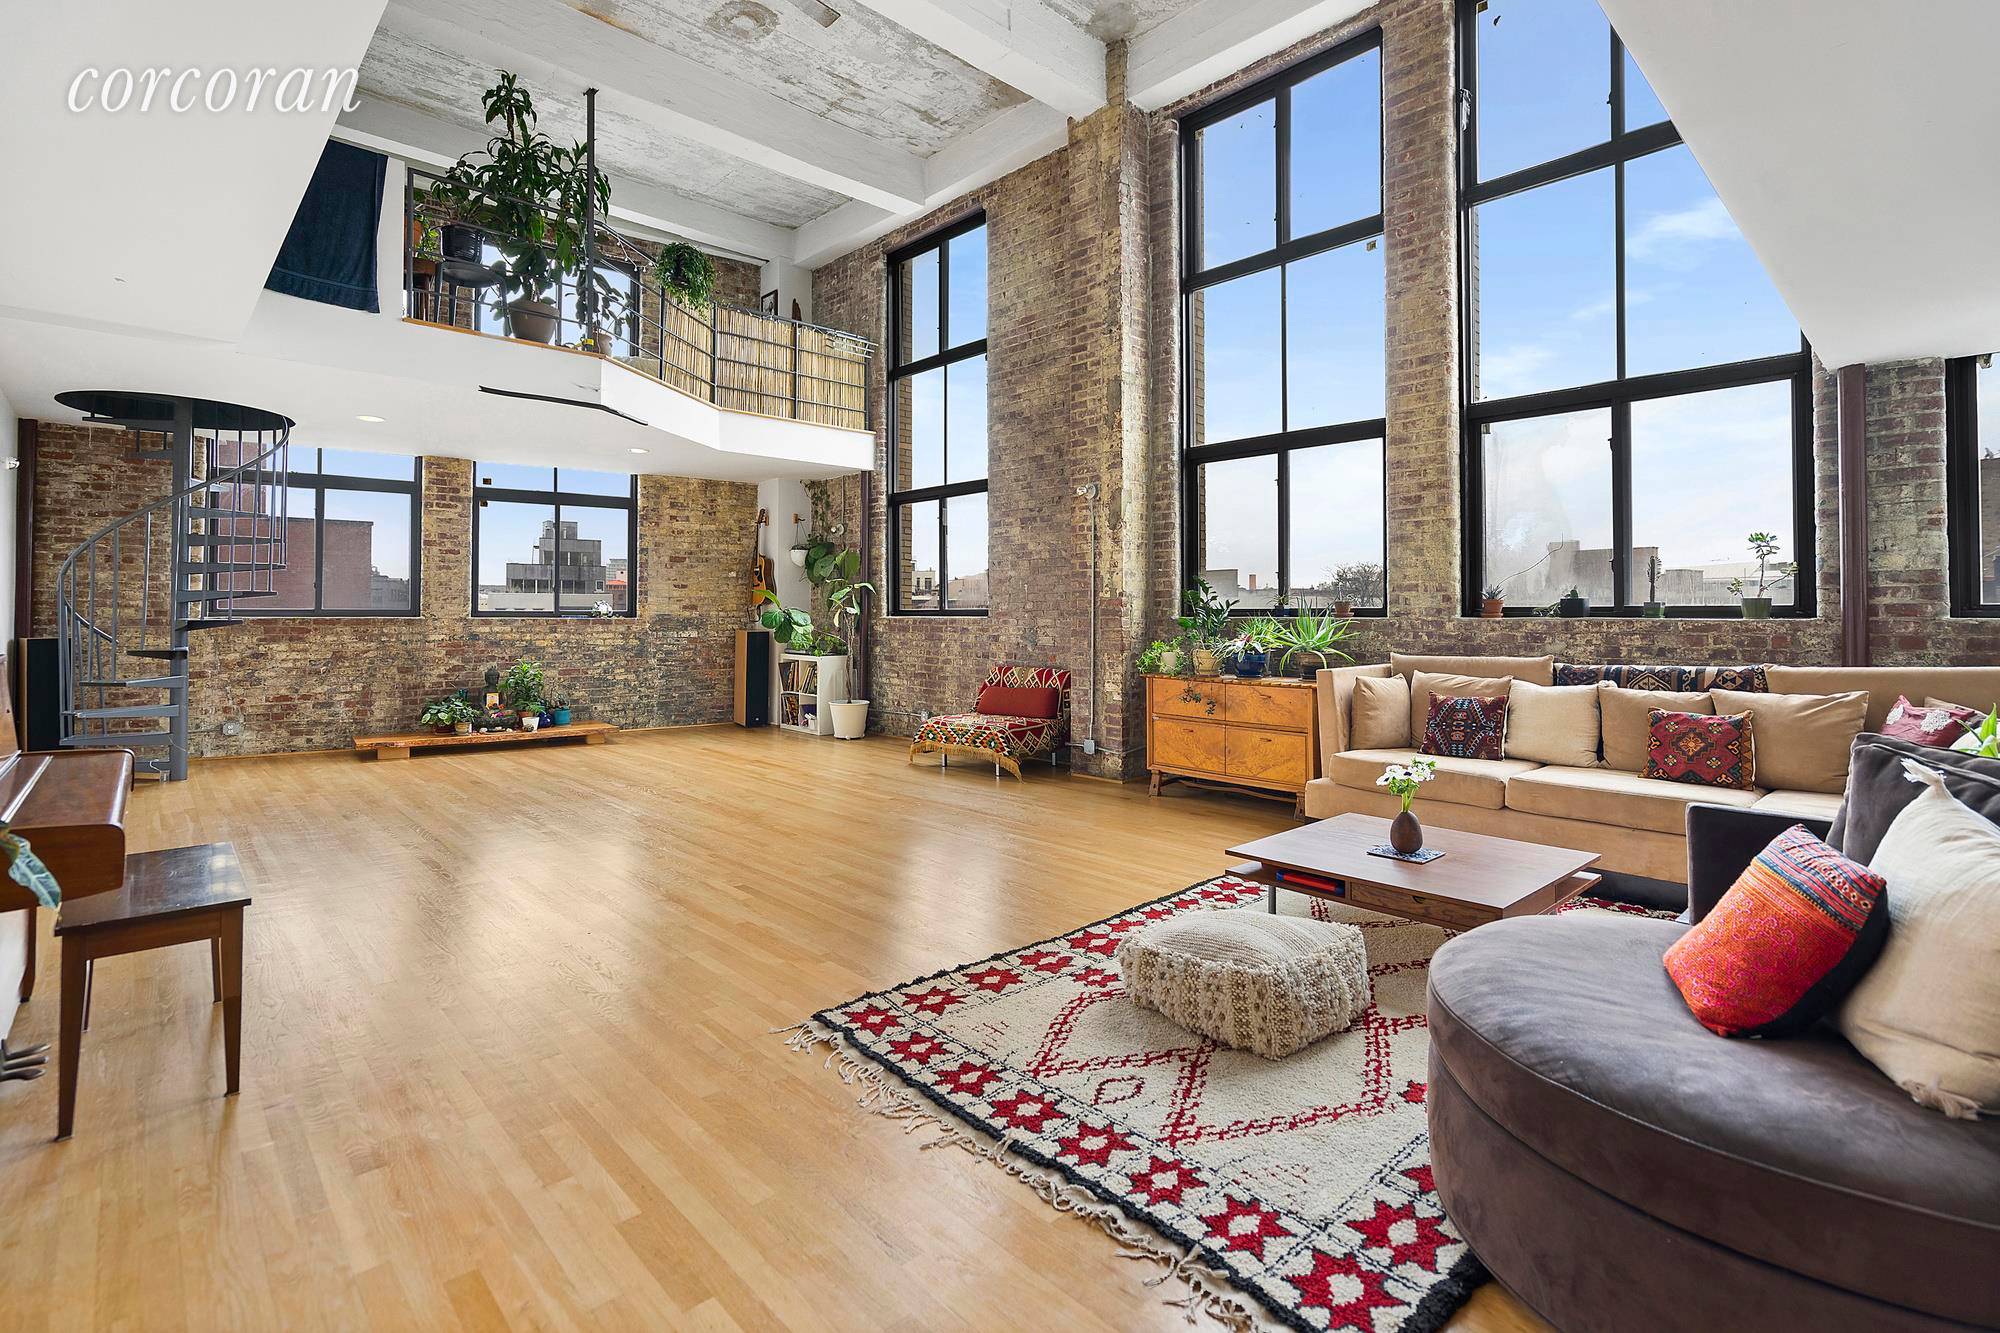 Residence 3G, a true loft apartment at The Esquire, Williamsburg's most coveted factory conversion building, must be seen to be believed !